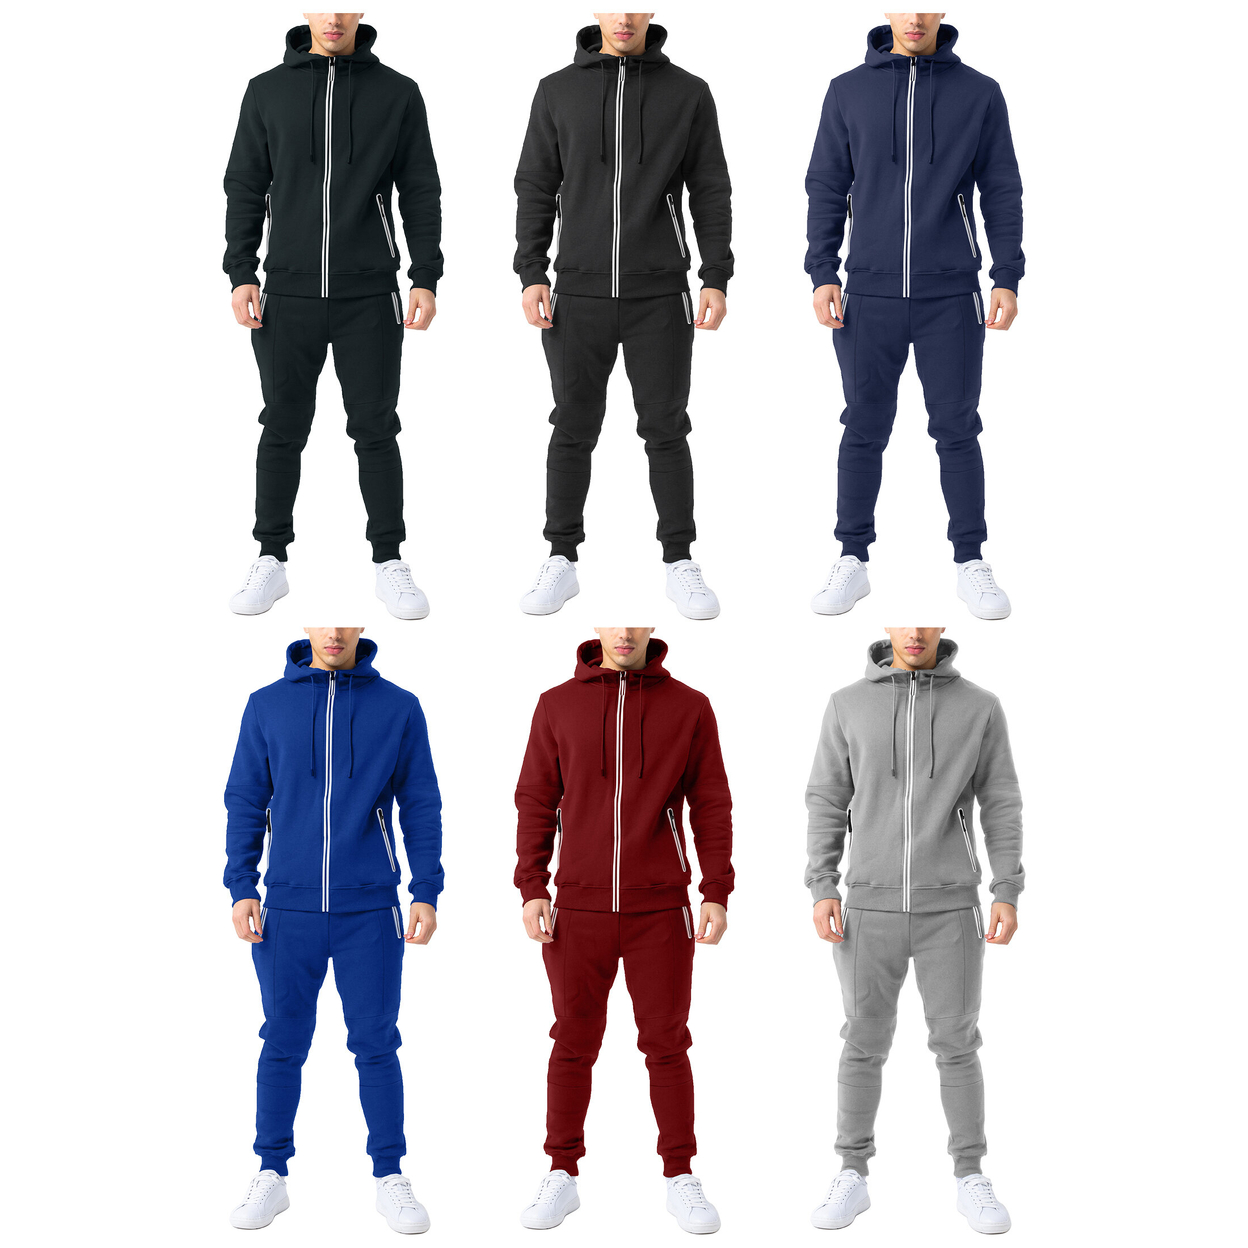 2-Pack: Men's Cozy Slim Fit Active Athletic Full Zip Hoodie And Jogger Tracksuit - Black & Blue, Large